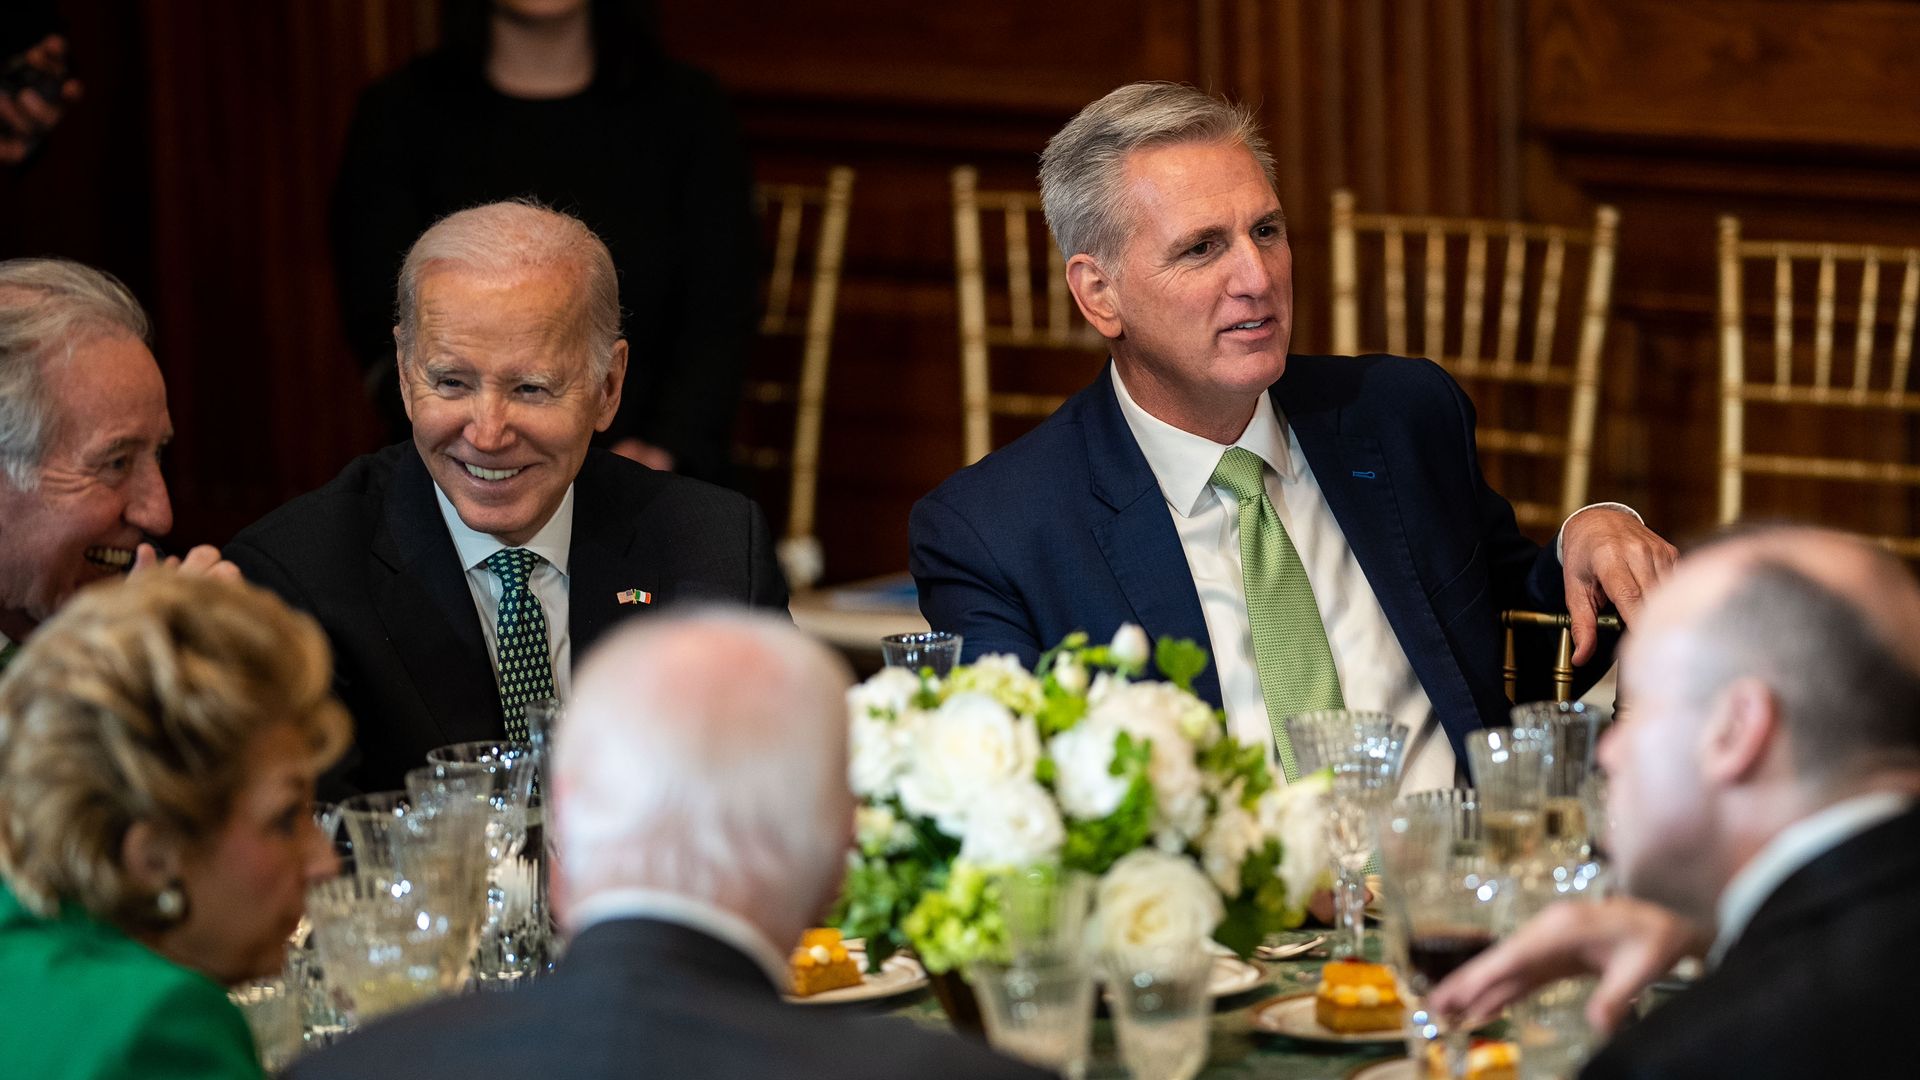 President Biden and House Speaker Kevin McCarthy, wearing green ties, sitting at a table.